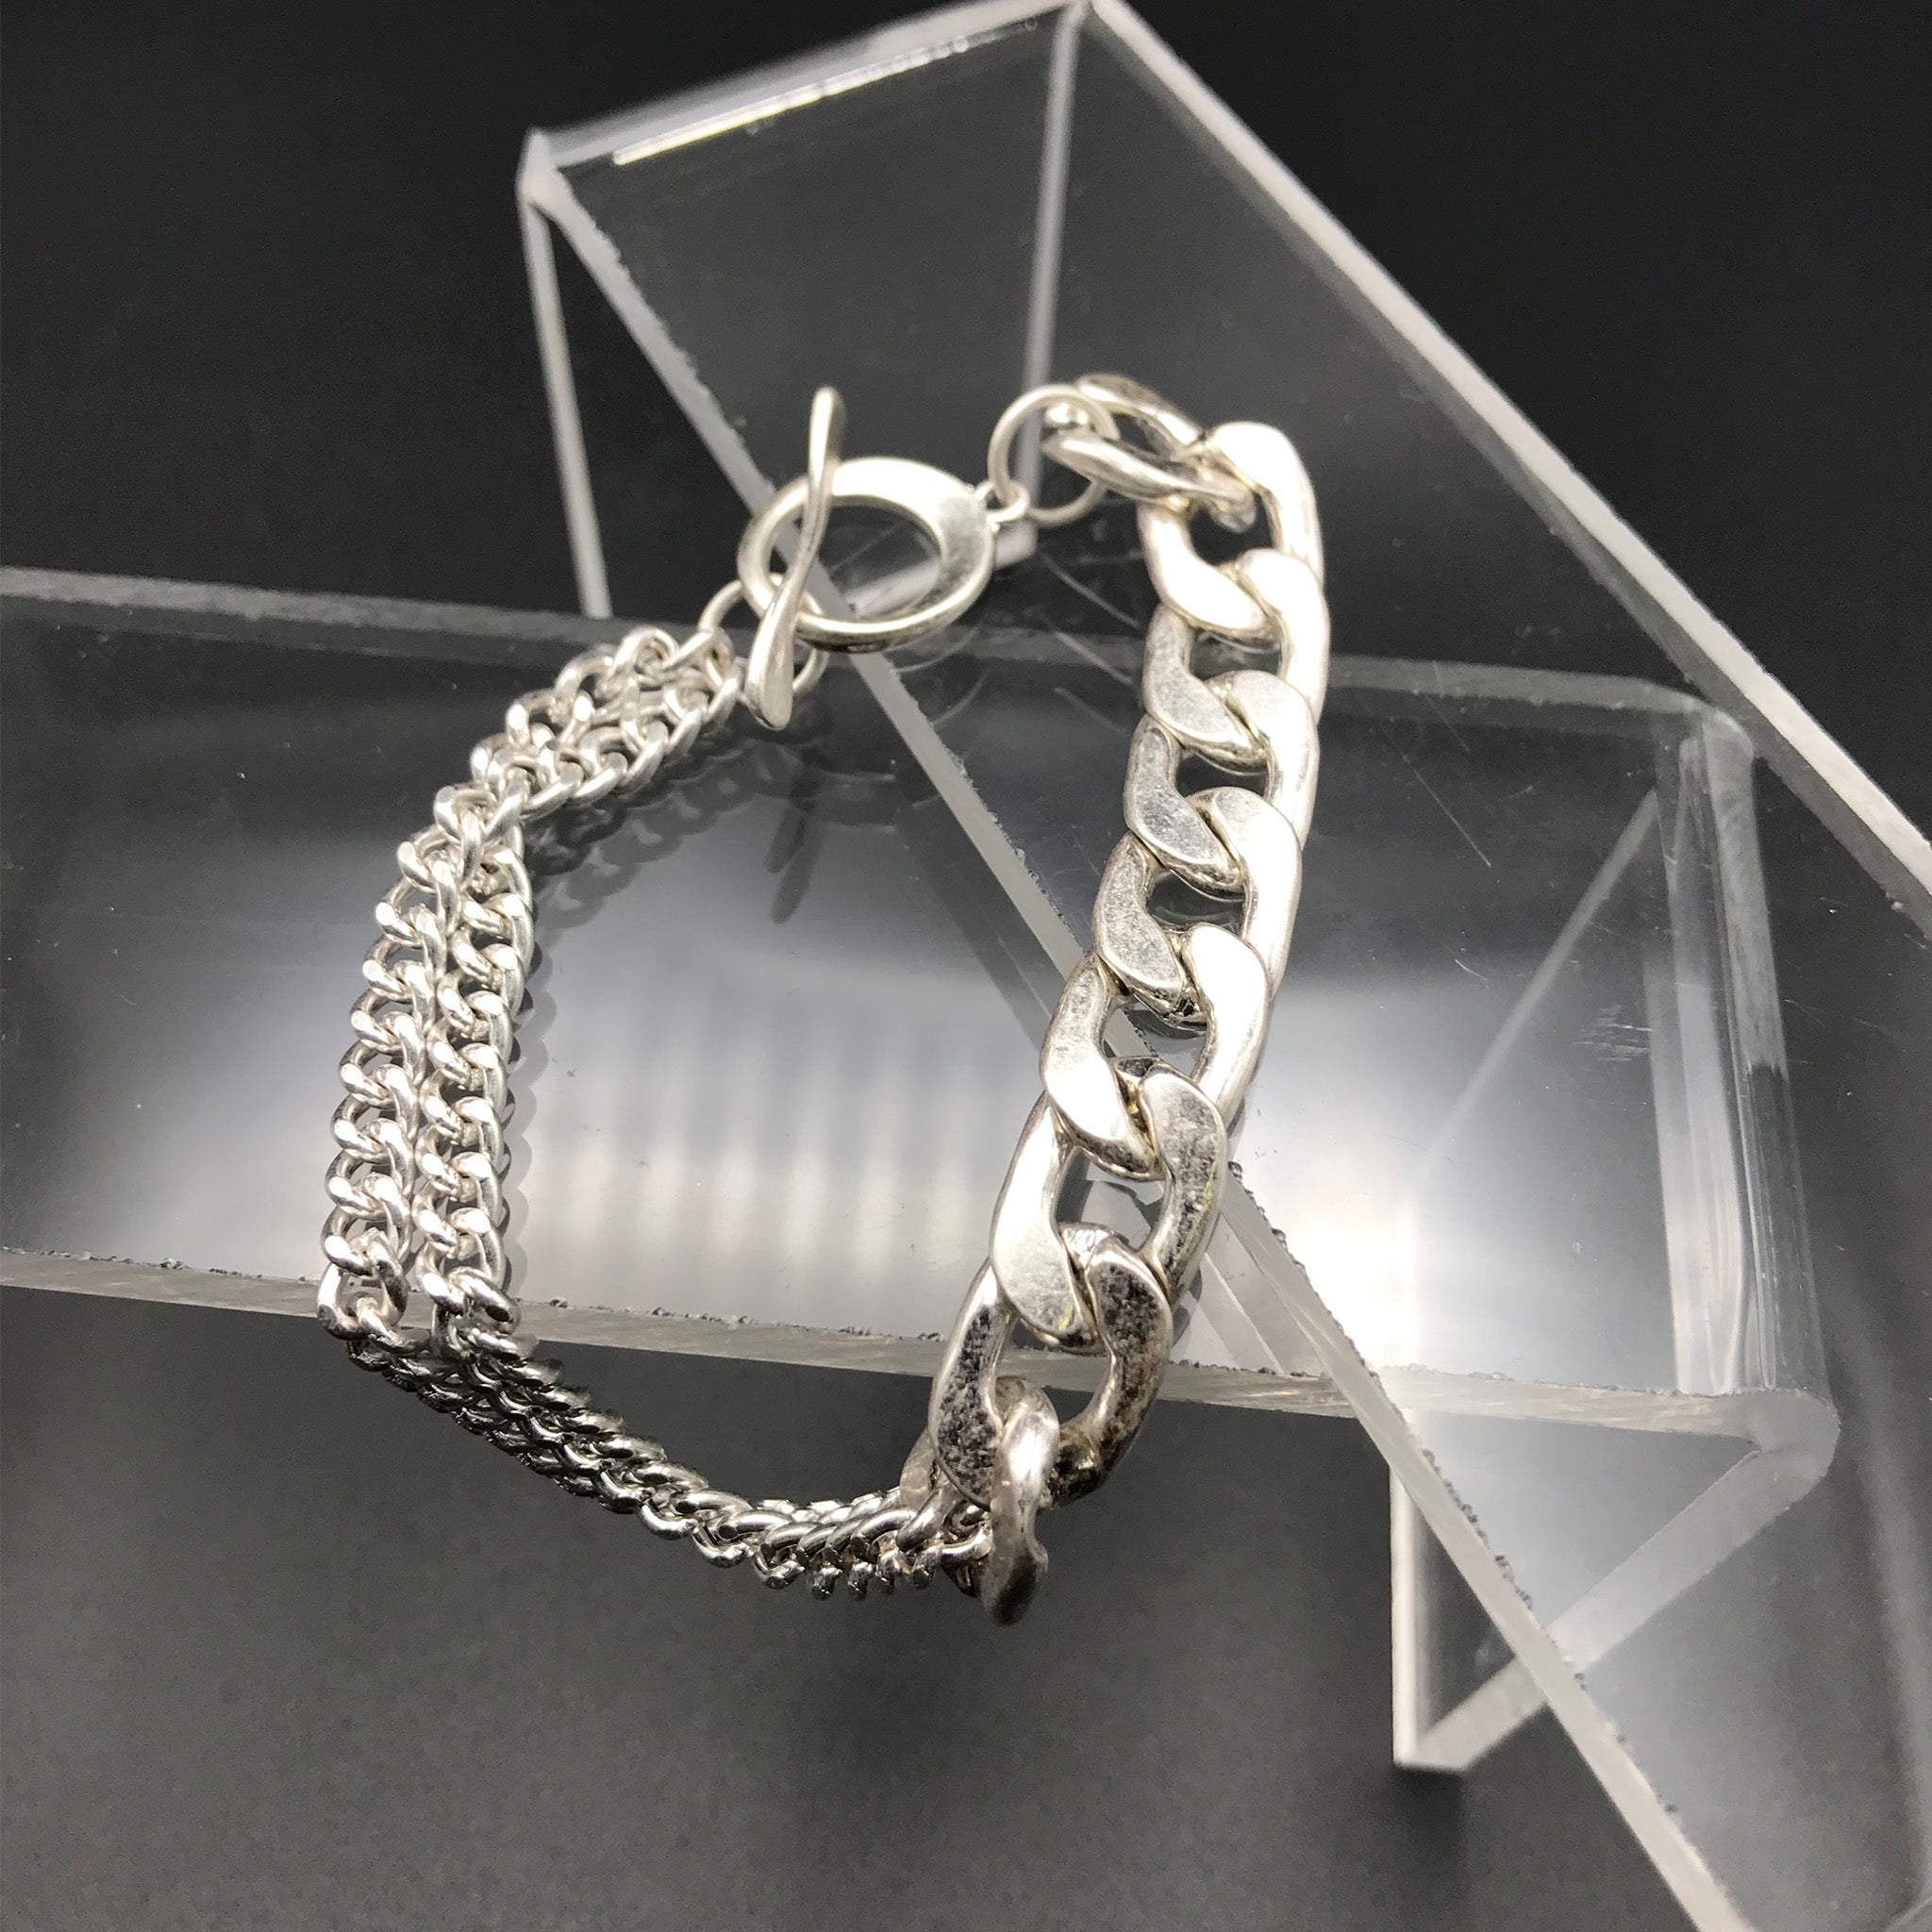 Two Type of Chains Bracelet